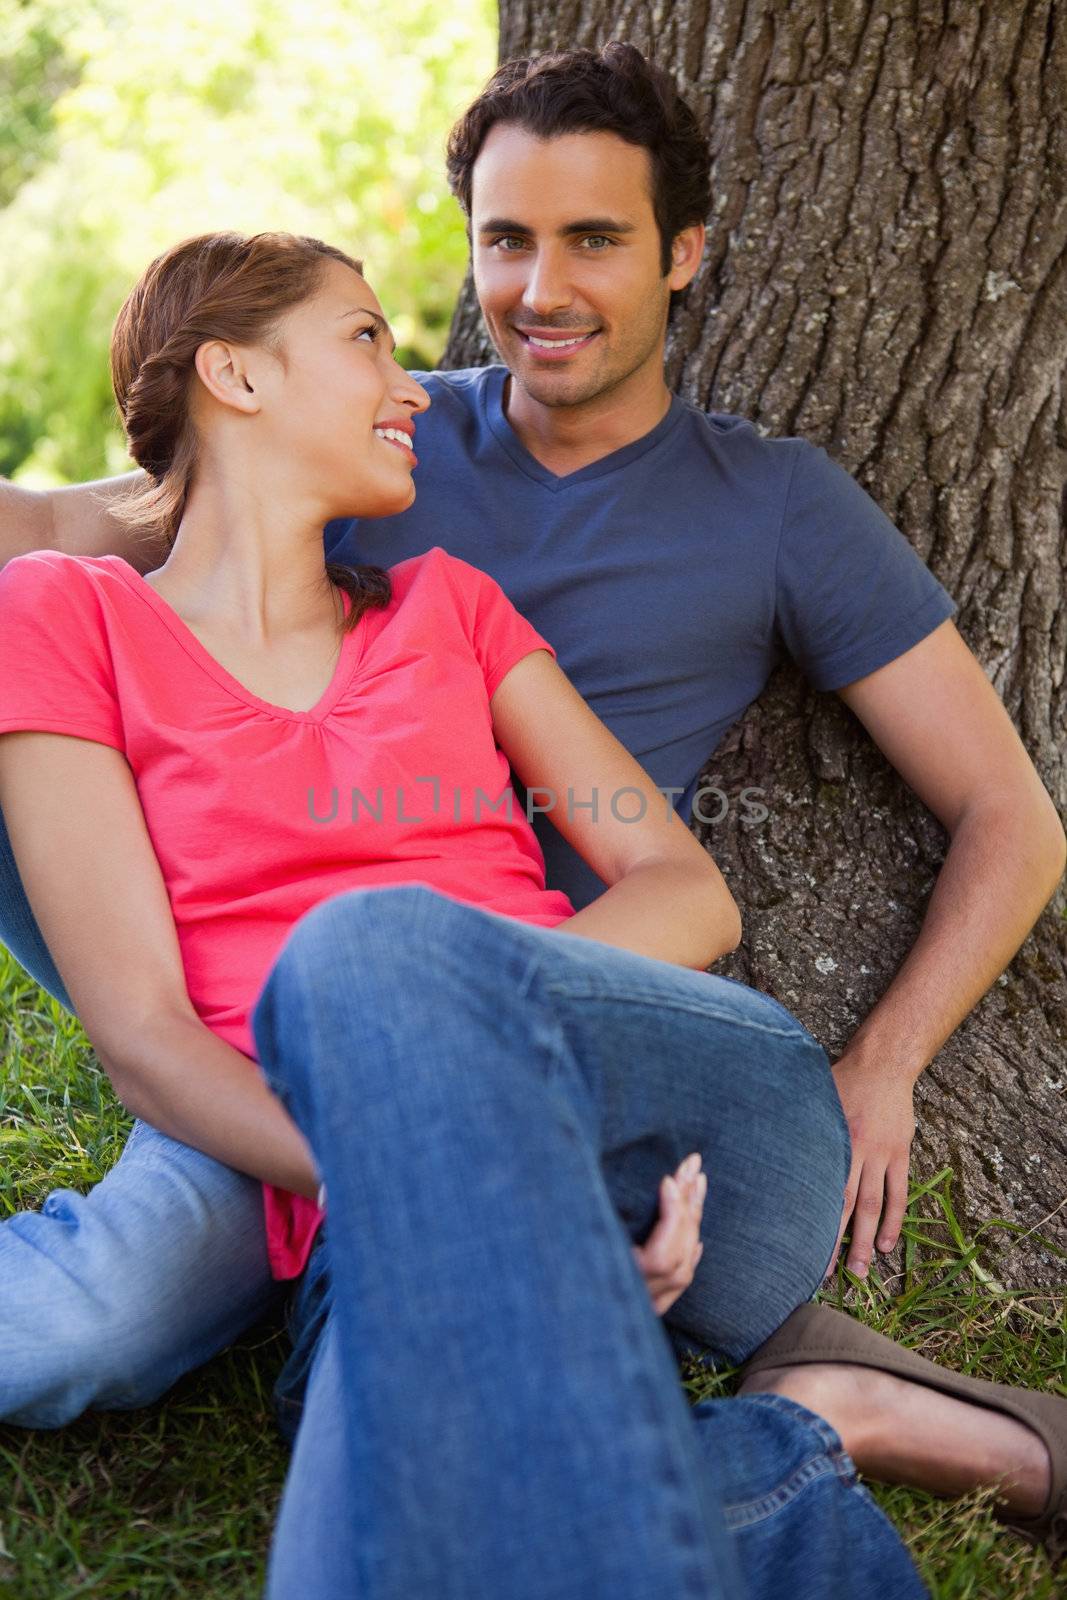 Woman smiling while looking at her friend as they sit together against the trunk of a tree